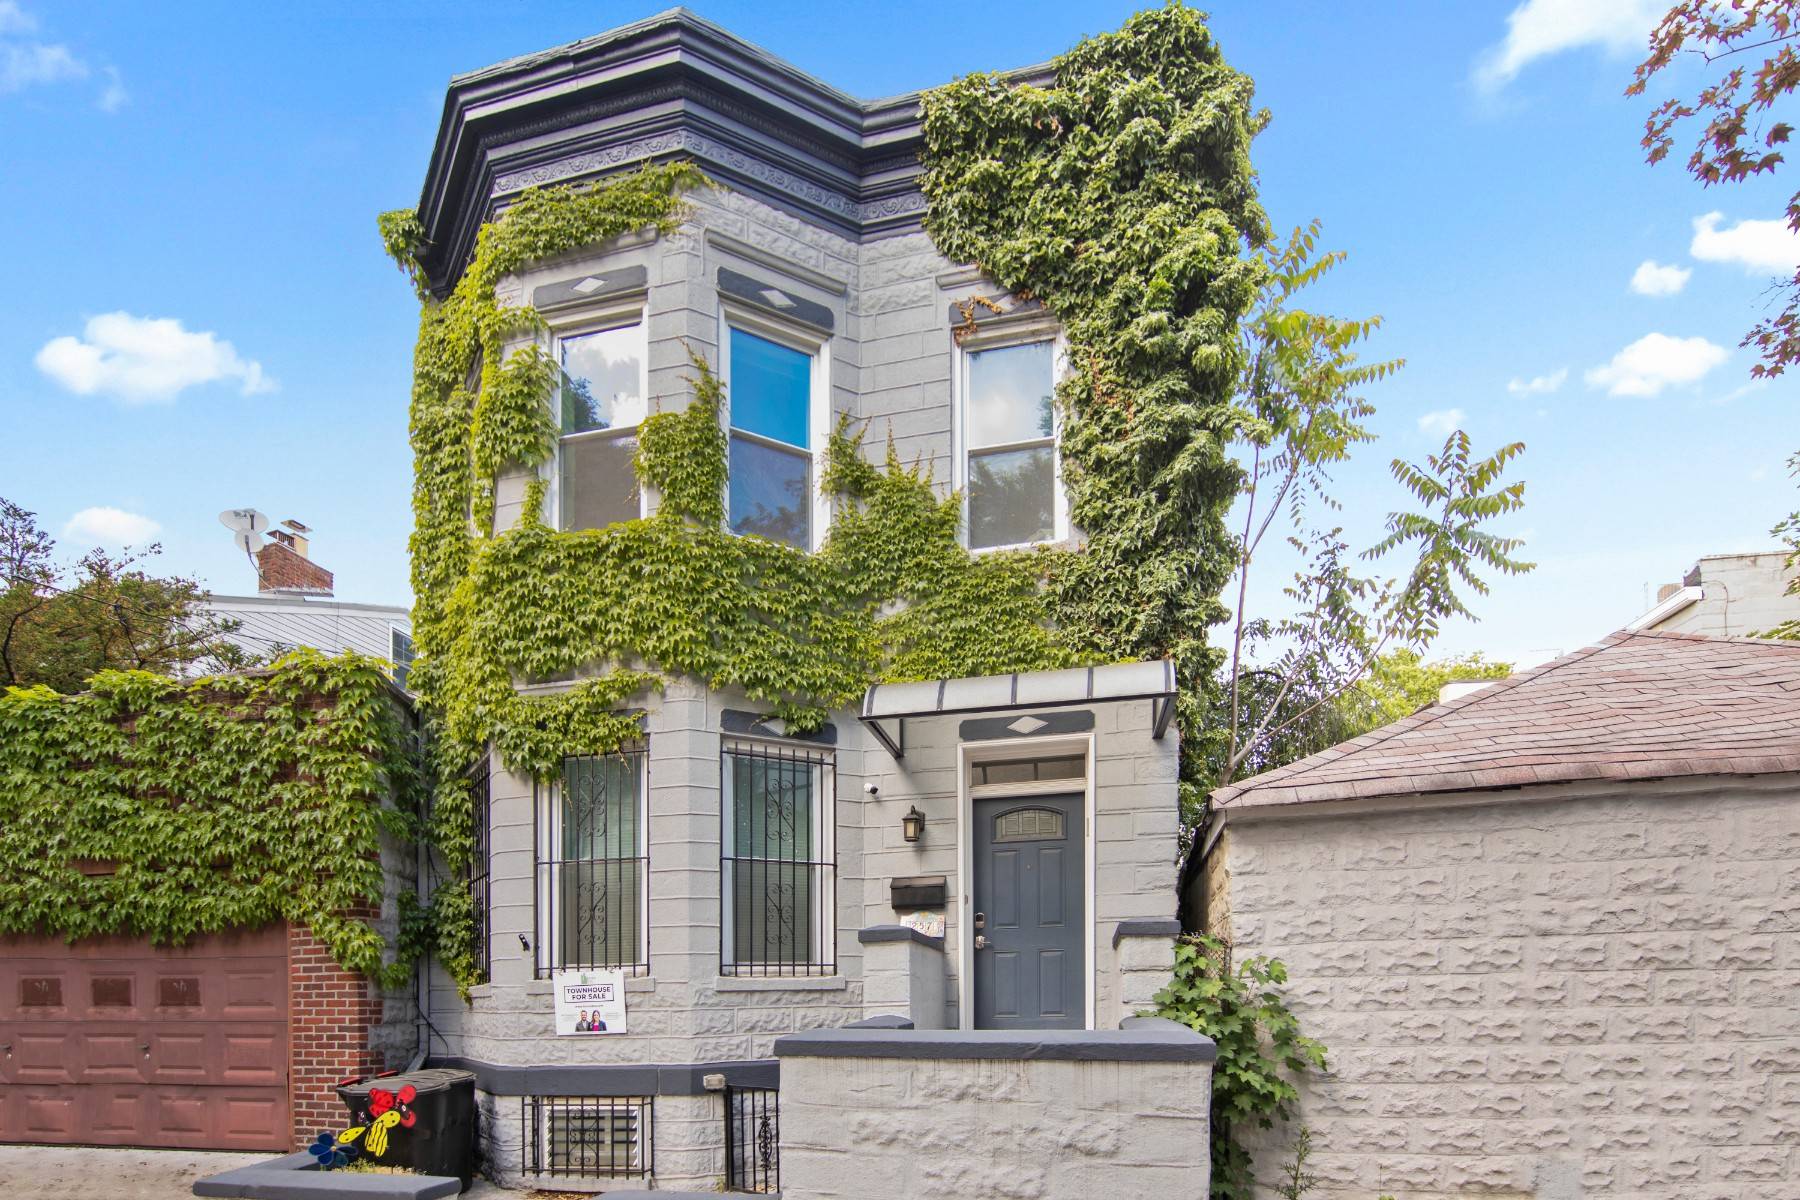 This beautiful, gut renovated brownstone in the heart of Windsor Terrace is the perfect place to call home !